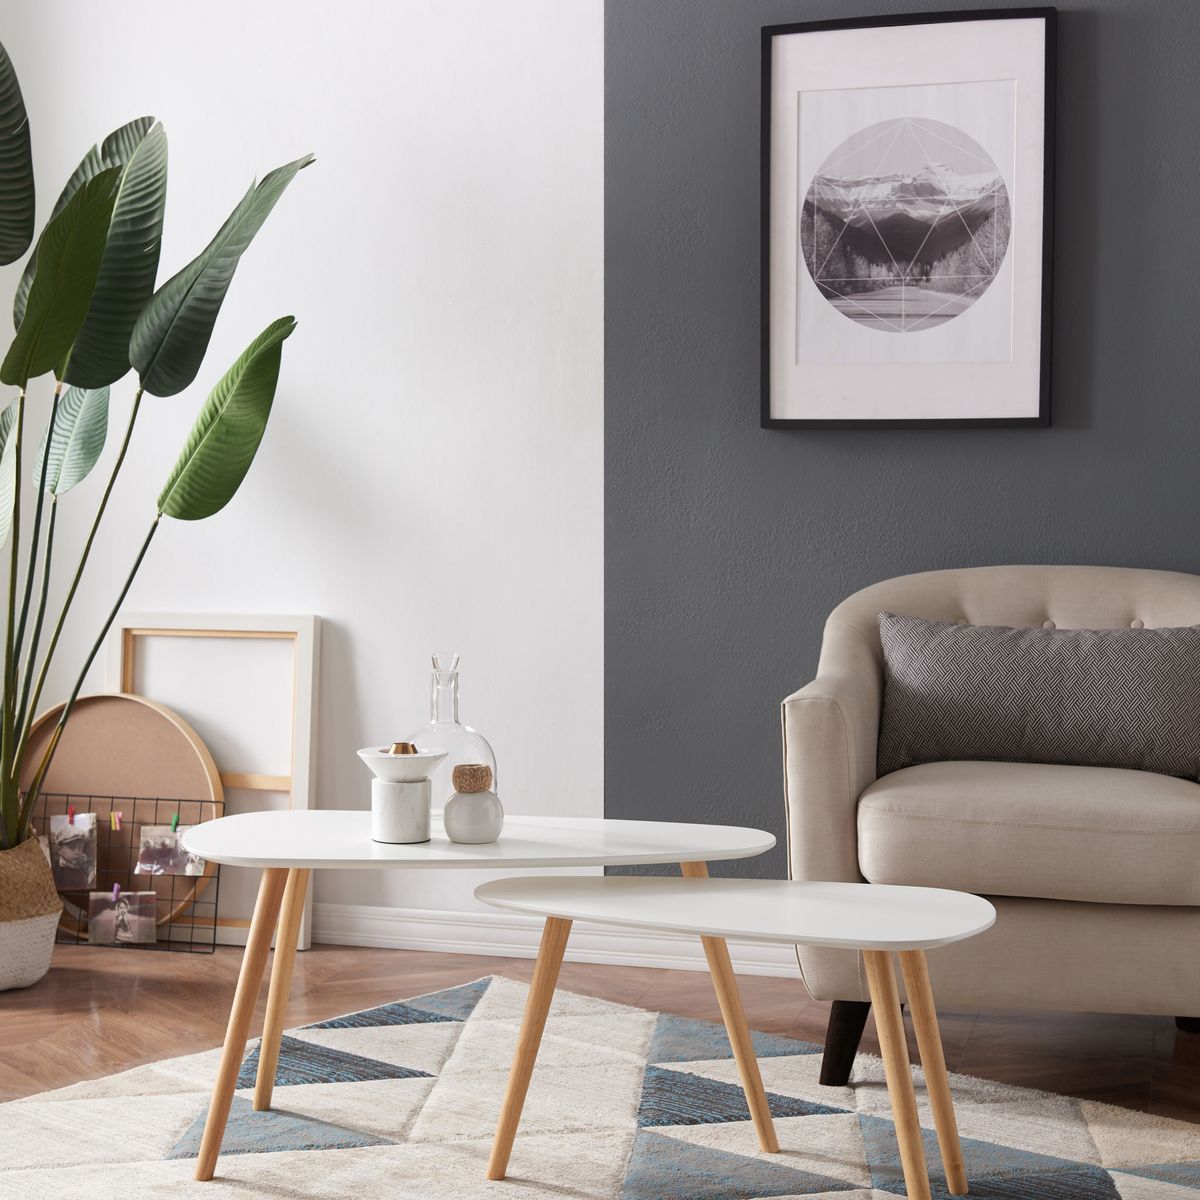 This New BQ Furniture Range Has Us Wanting To Redecorate In Lockdown Real Homes